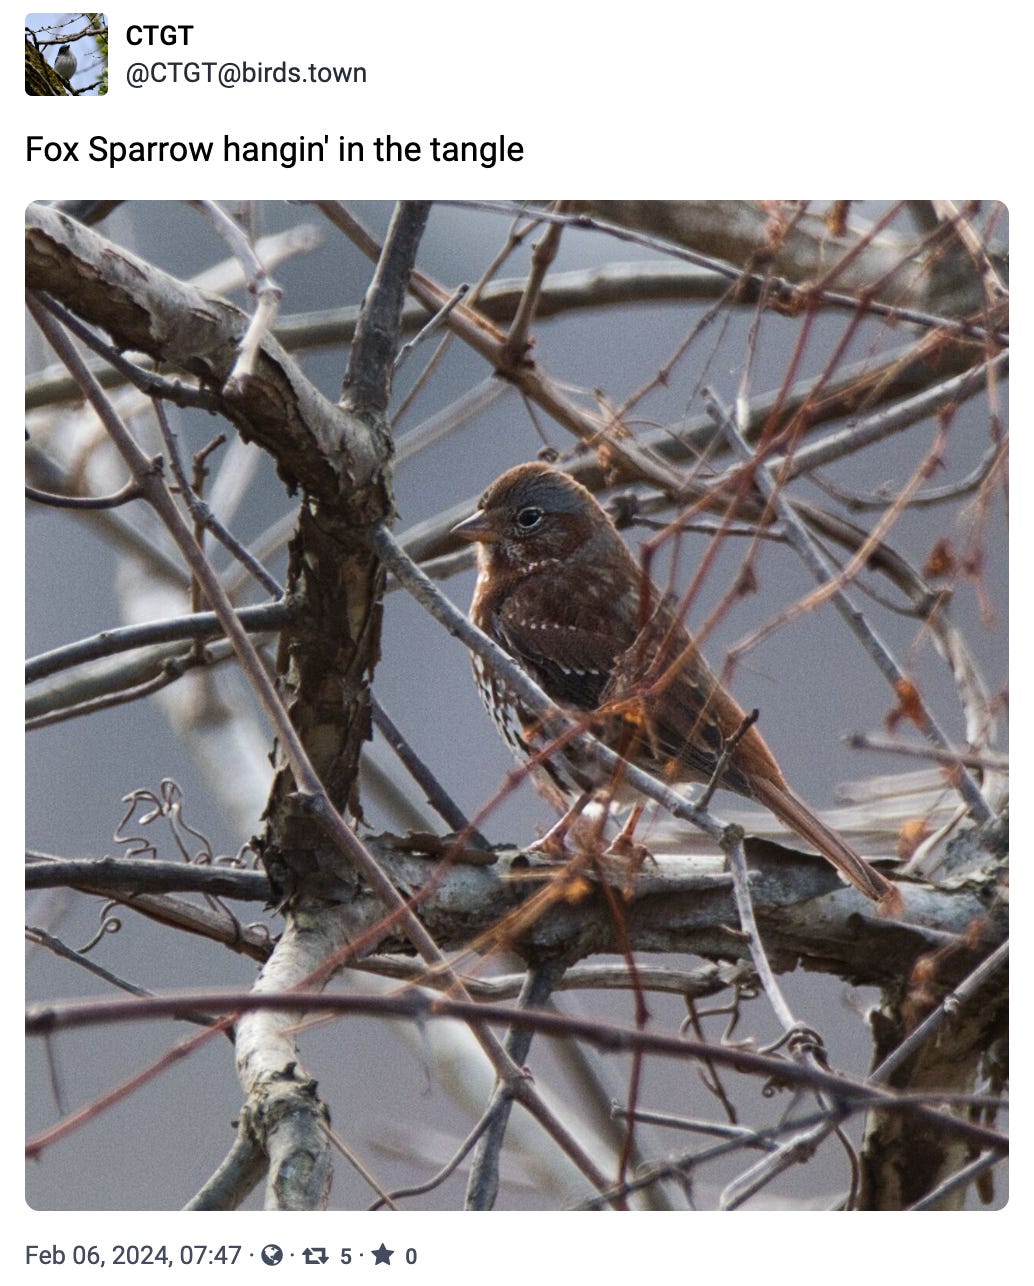 Fox Sparrow hangin' in the tangle